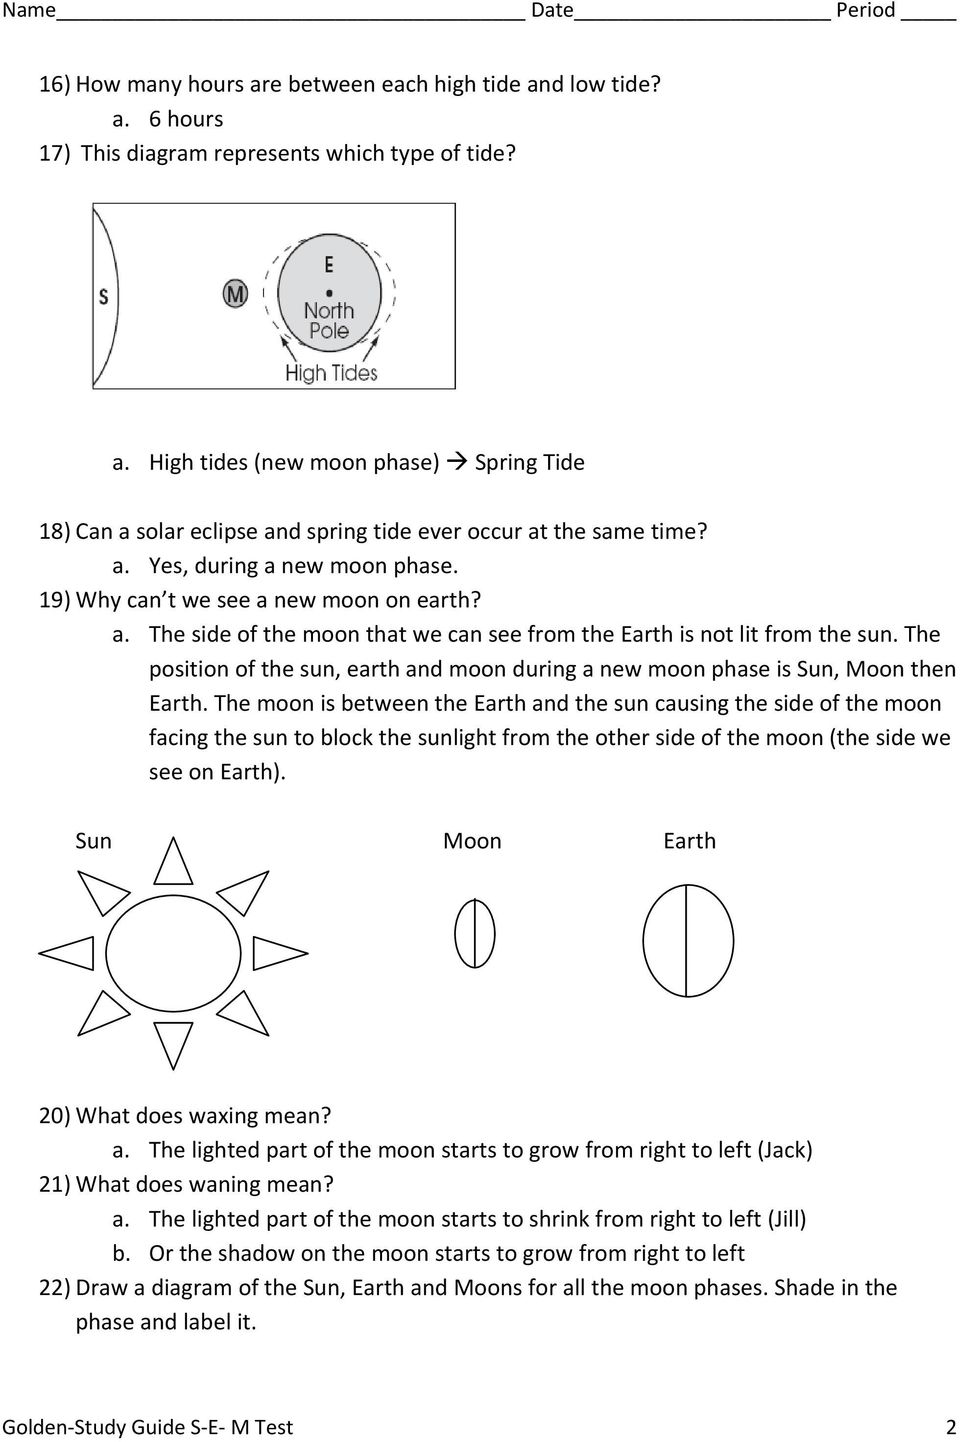 The position of the sun, earth and moon during a new moon phase is Sun, Moon then Earth.